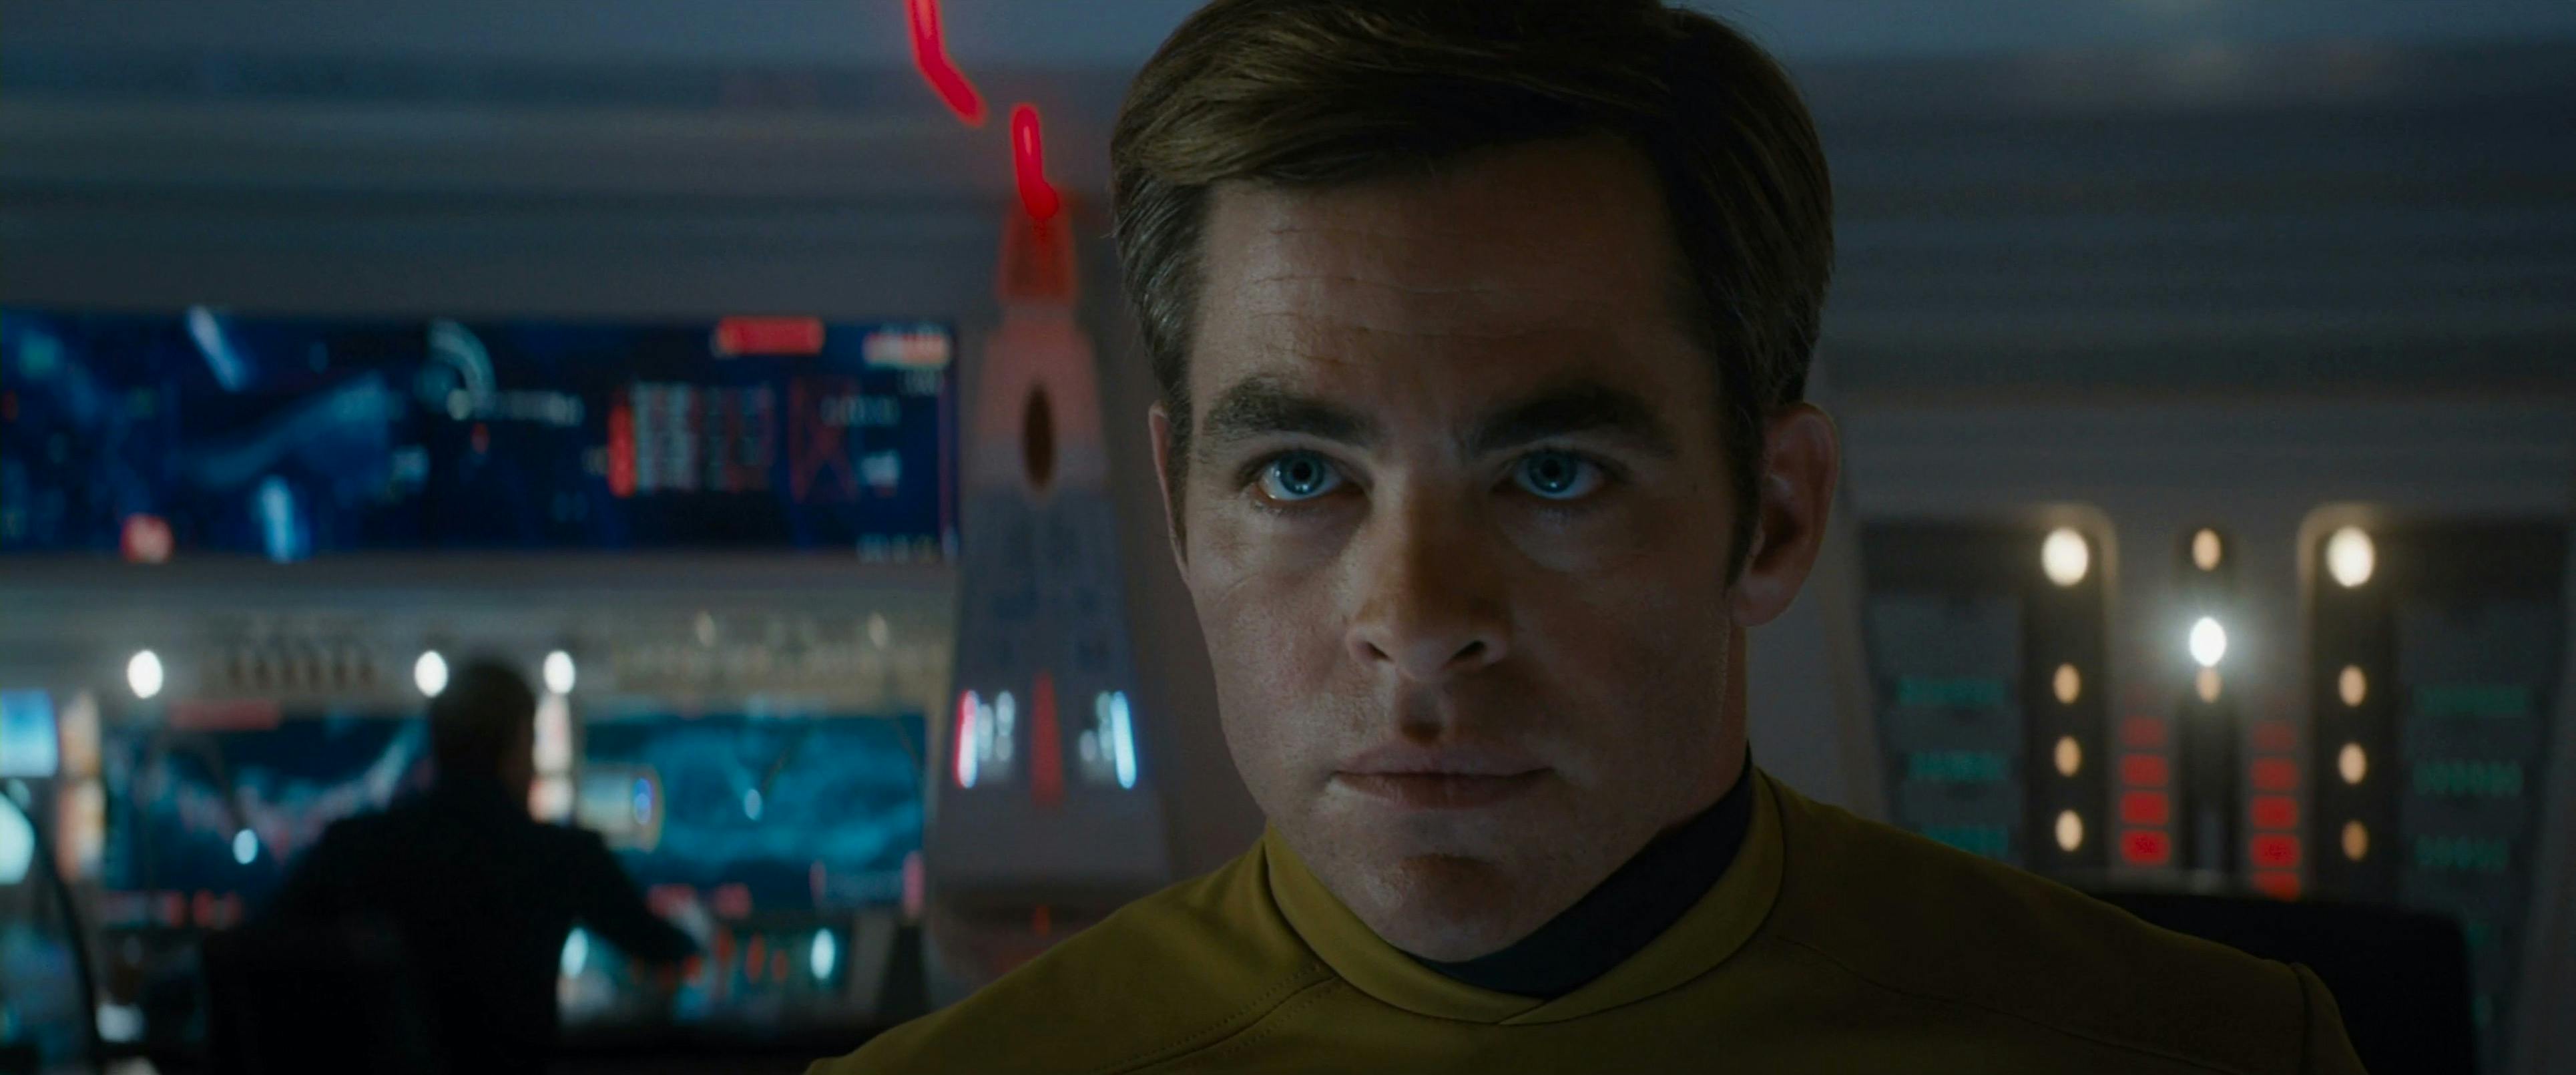 Kirk looks ahead at the viewscreen realizing the Enterprise is going down for real this time in Star Trek Beyond